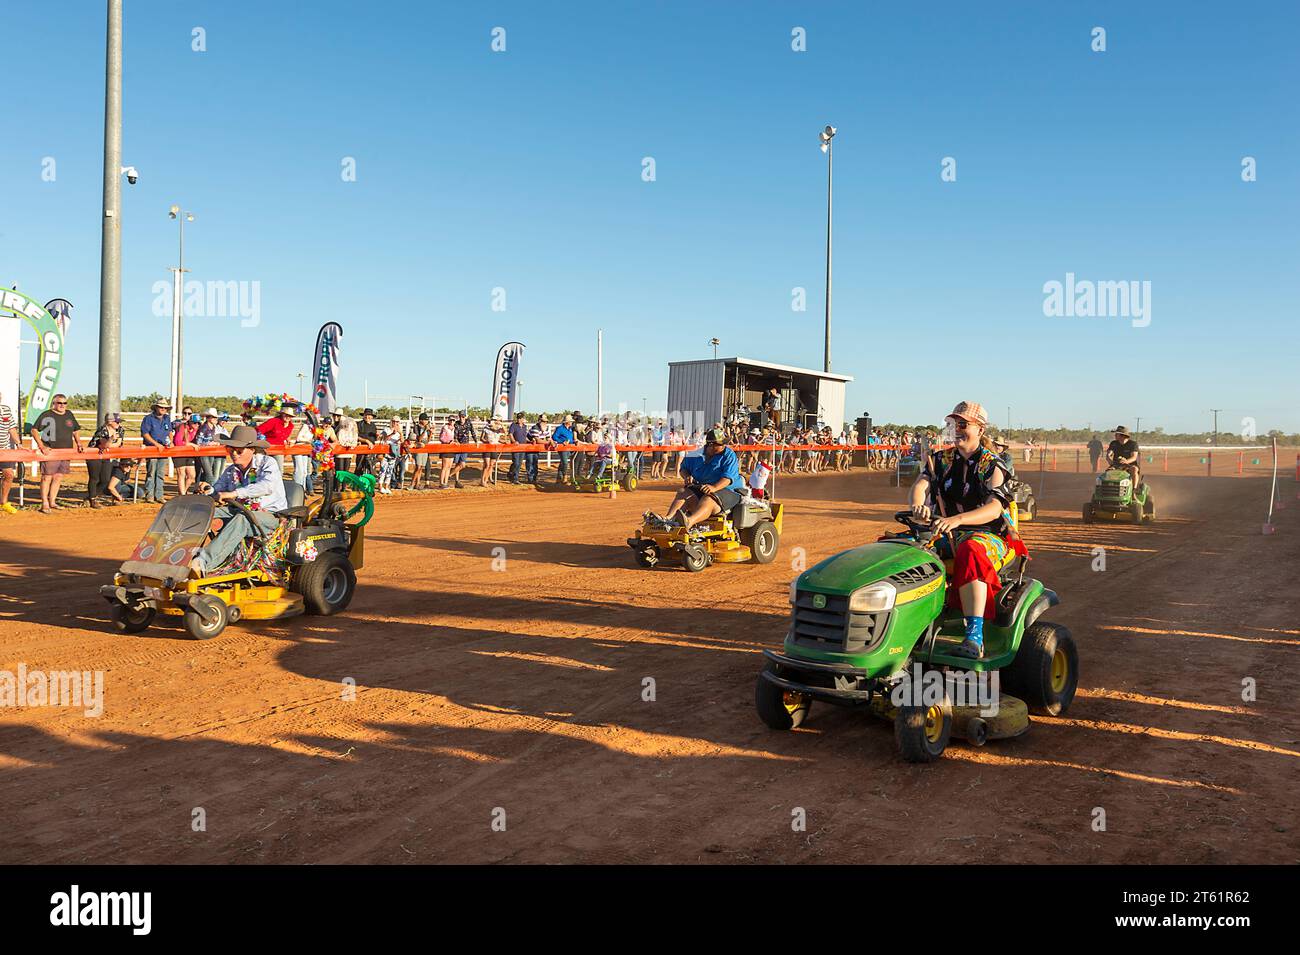 Lawn Mower racing at Boulia, a popular Outback event in Queensland, QLD, Australia Stock Photo